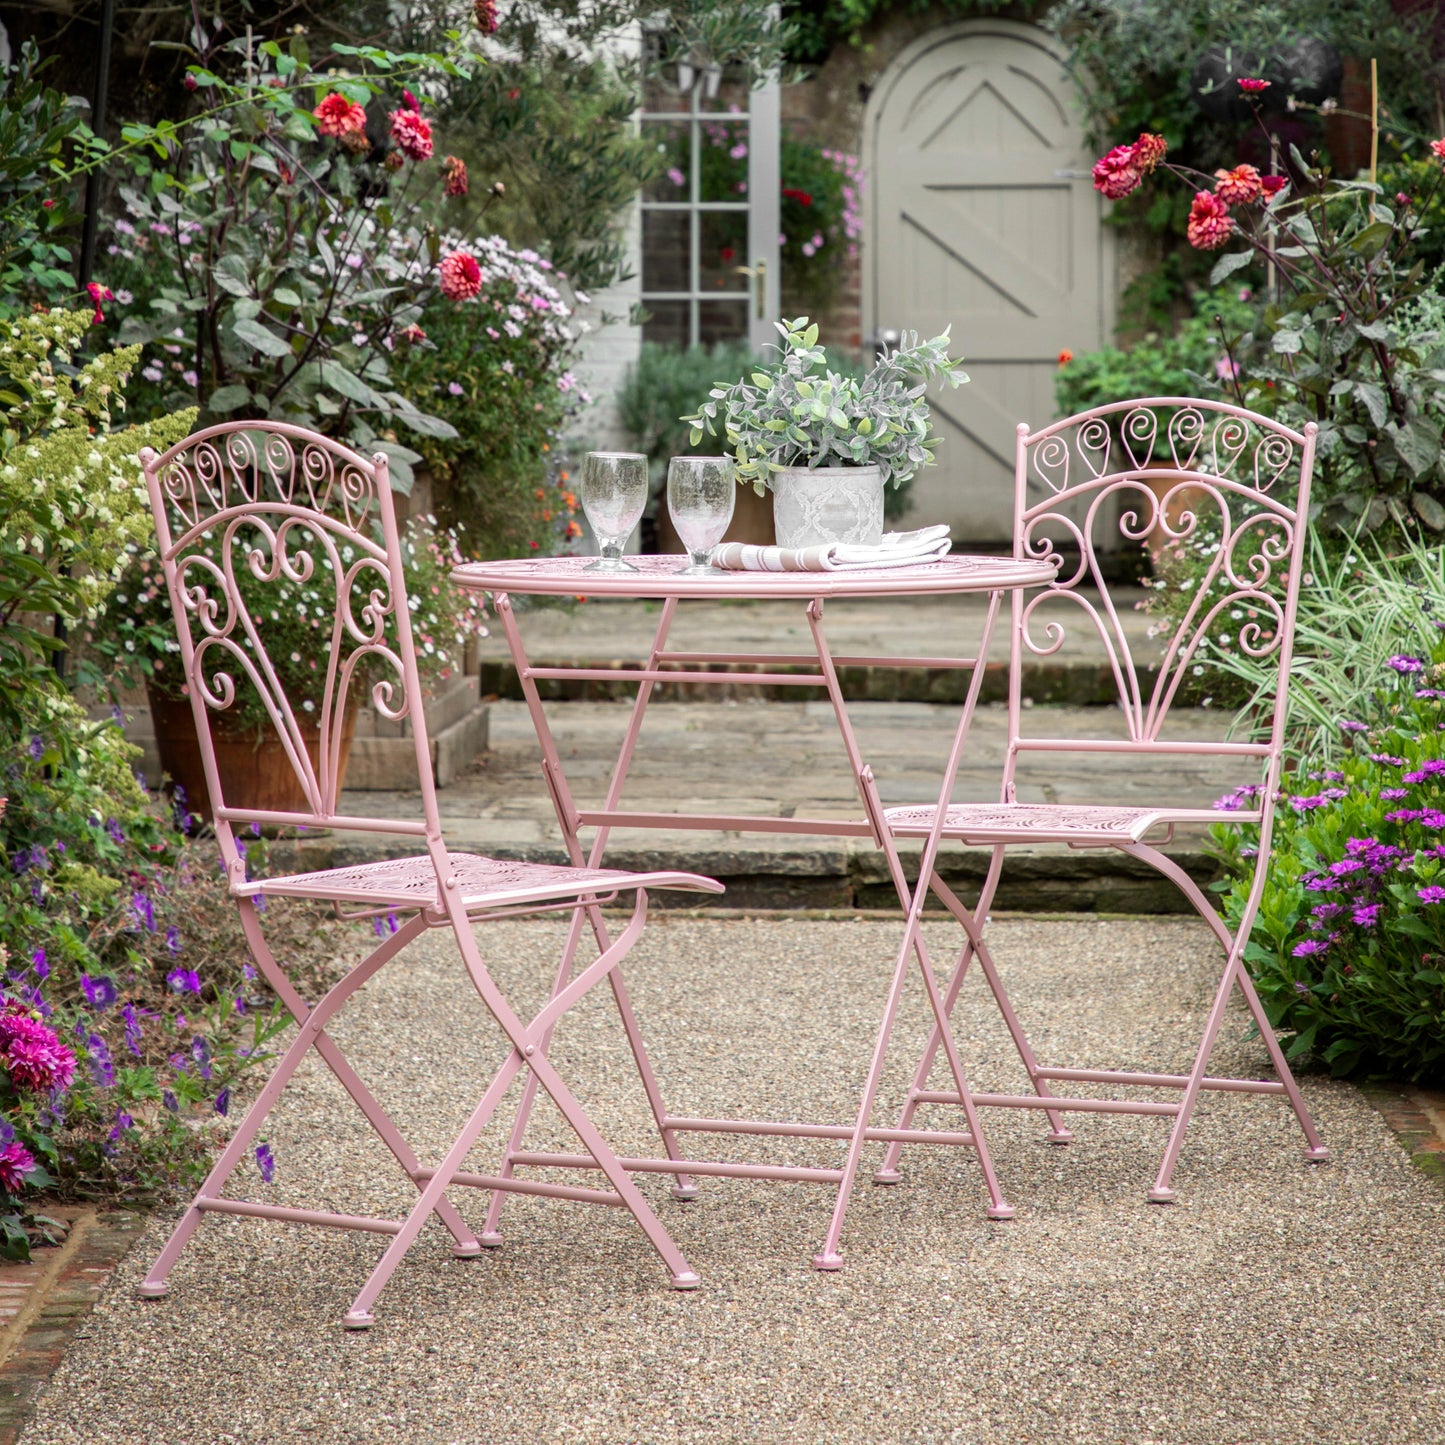 A Roborough 2 Seater Bistro Set Coral by Kikiathome.co.uk, perfect for interior decor or home furniture, displayed in a garden.